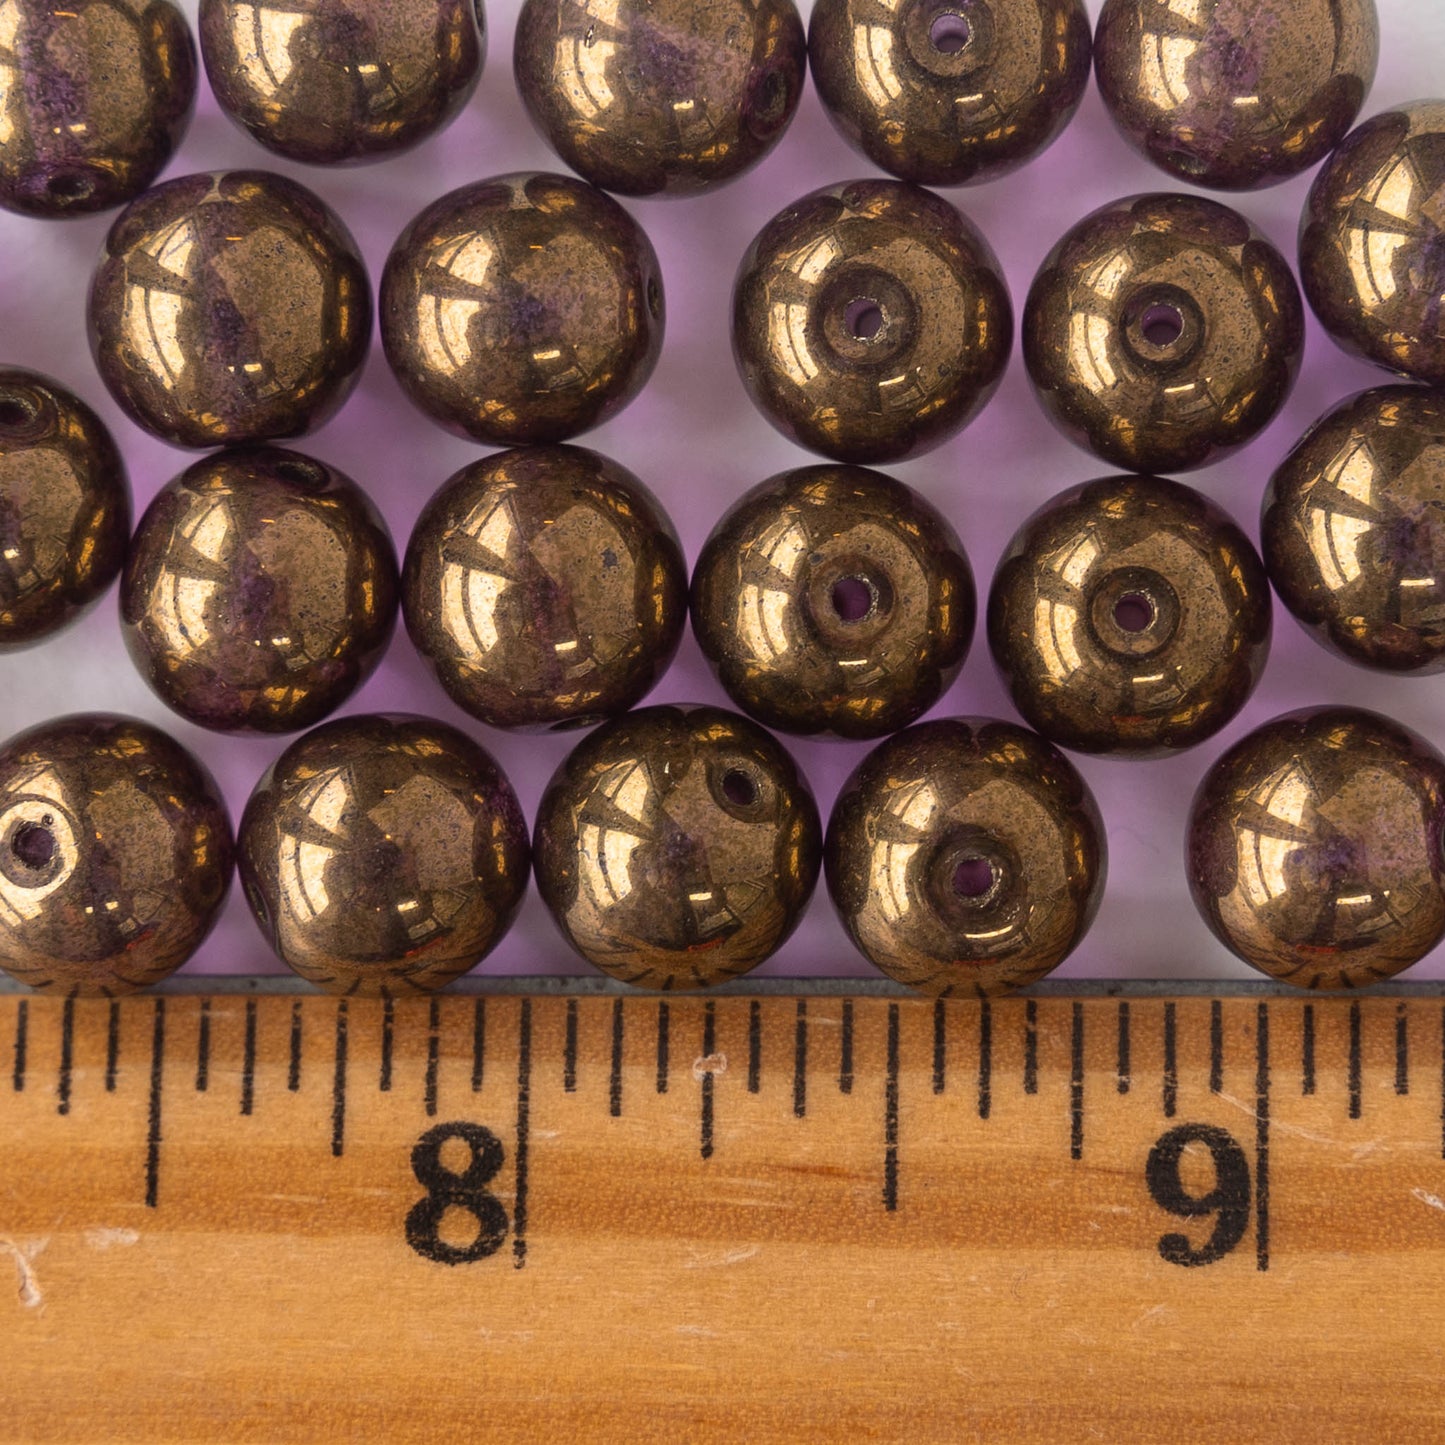 10mm Round Glass Beads - Violet Purple Gold Luster - 10 Beads